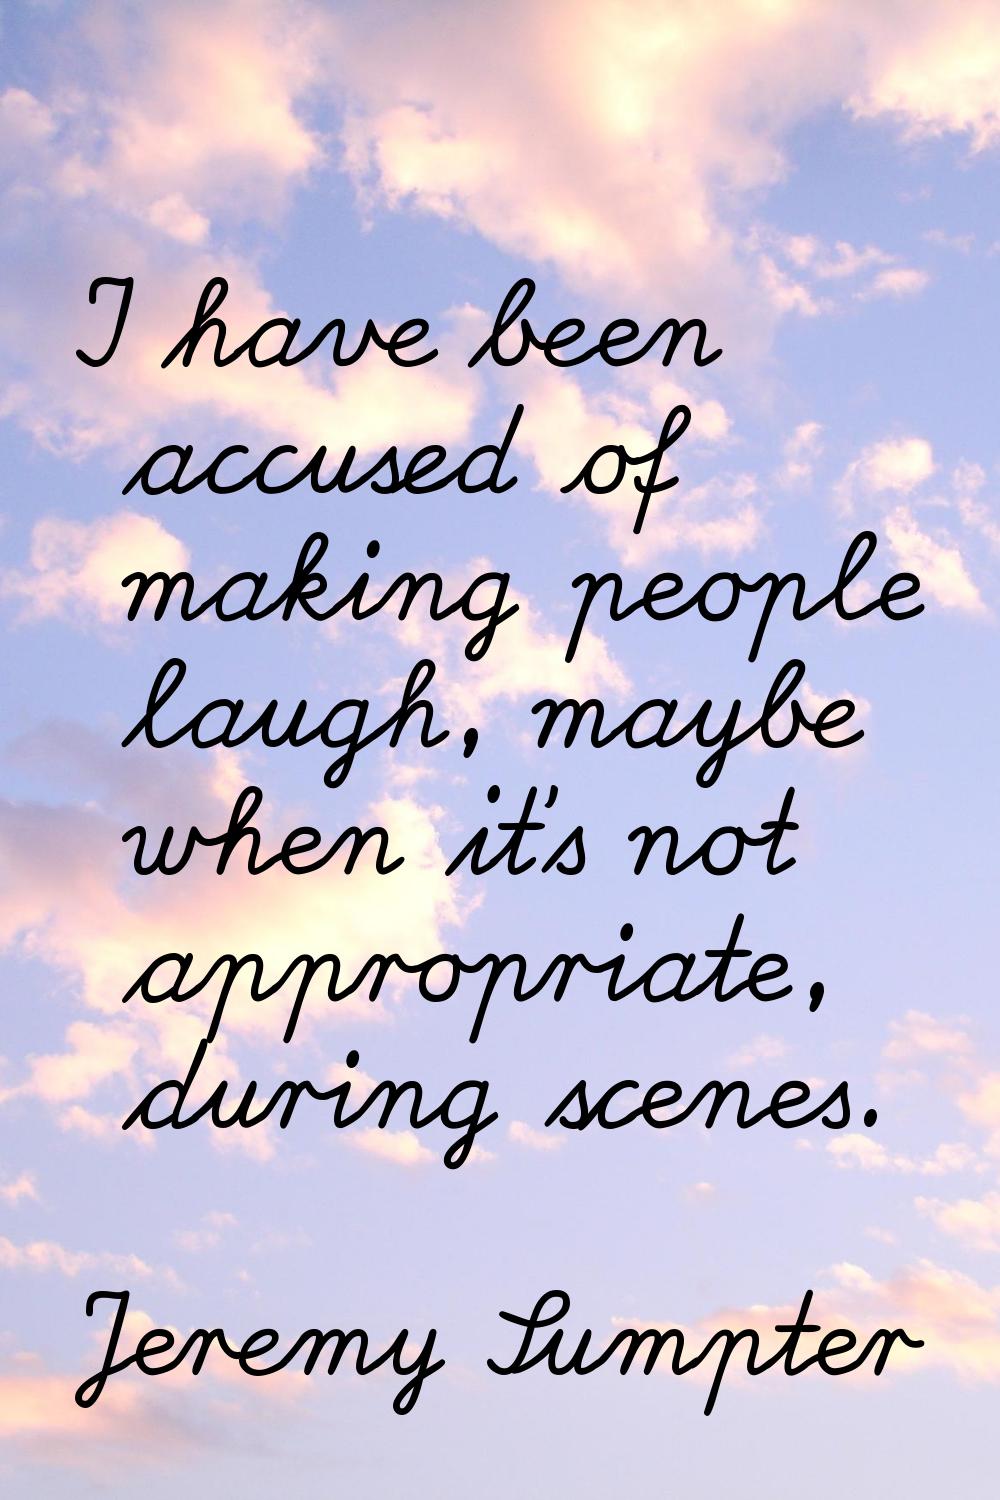 I have been accused of making people laugh, maybe when it's not appropriate, during scenes.